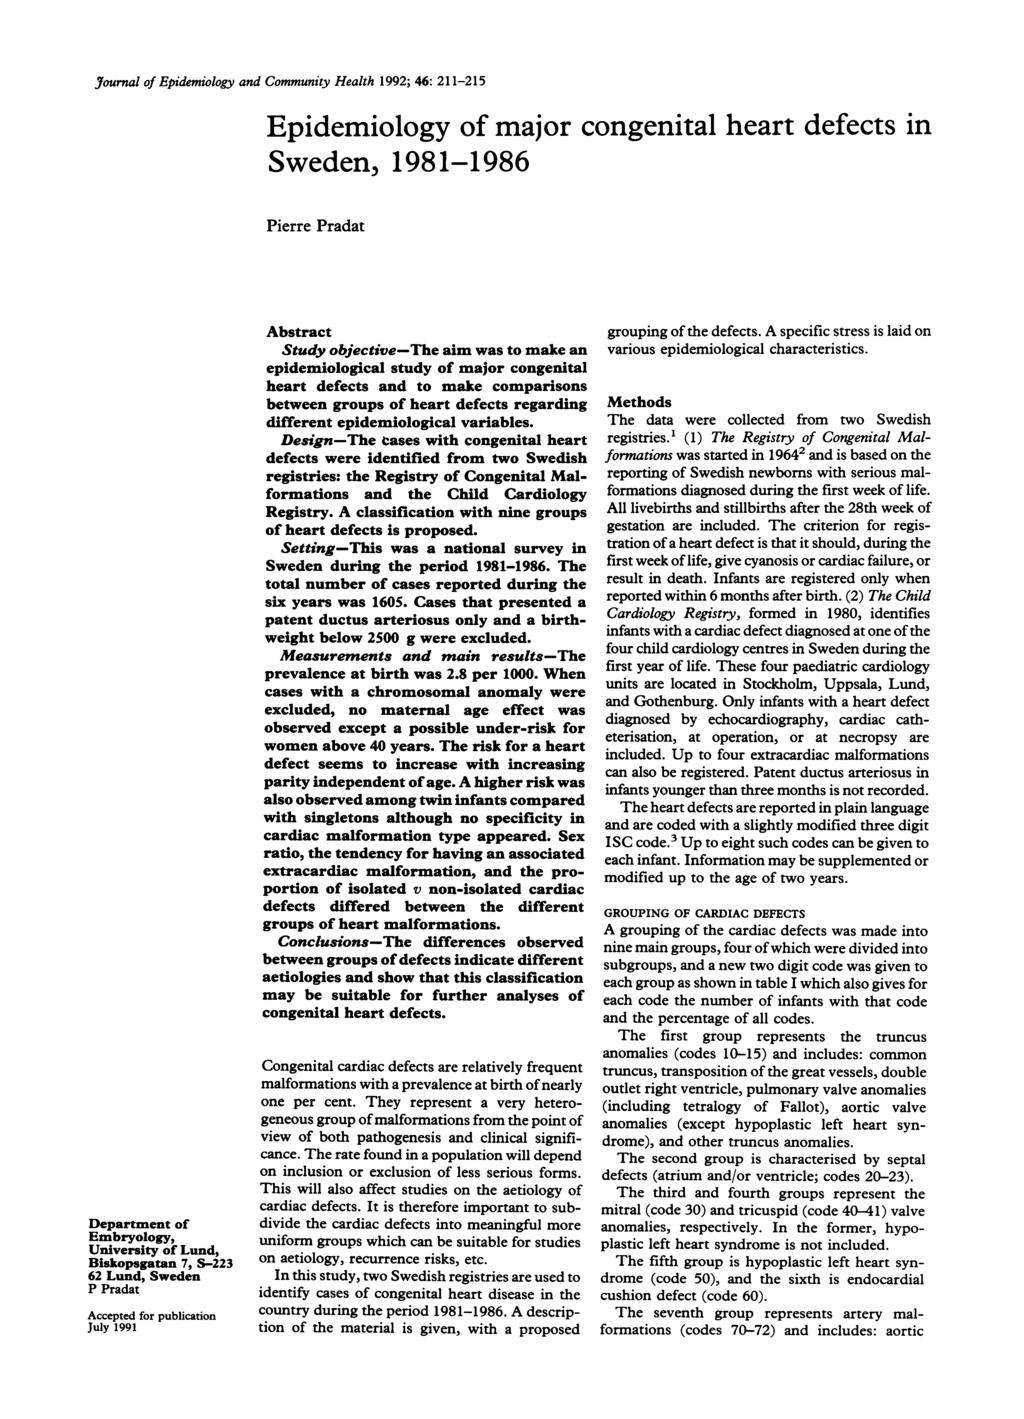 Journal of Epidemiology and Community Health 1992; 46: 2-2 Department of Embryology, University of Lund, Biskopsgatan 7, S-2 62 Lund, Sweden P Pradat Accepted for publication July 1991 Epidemiology